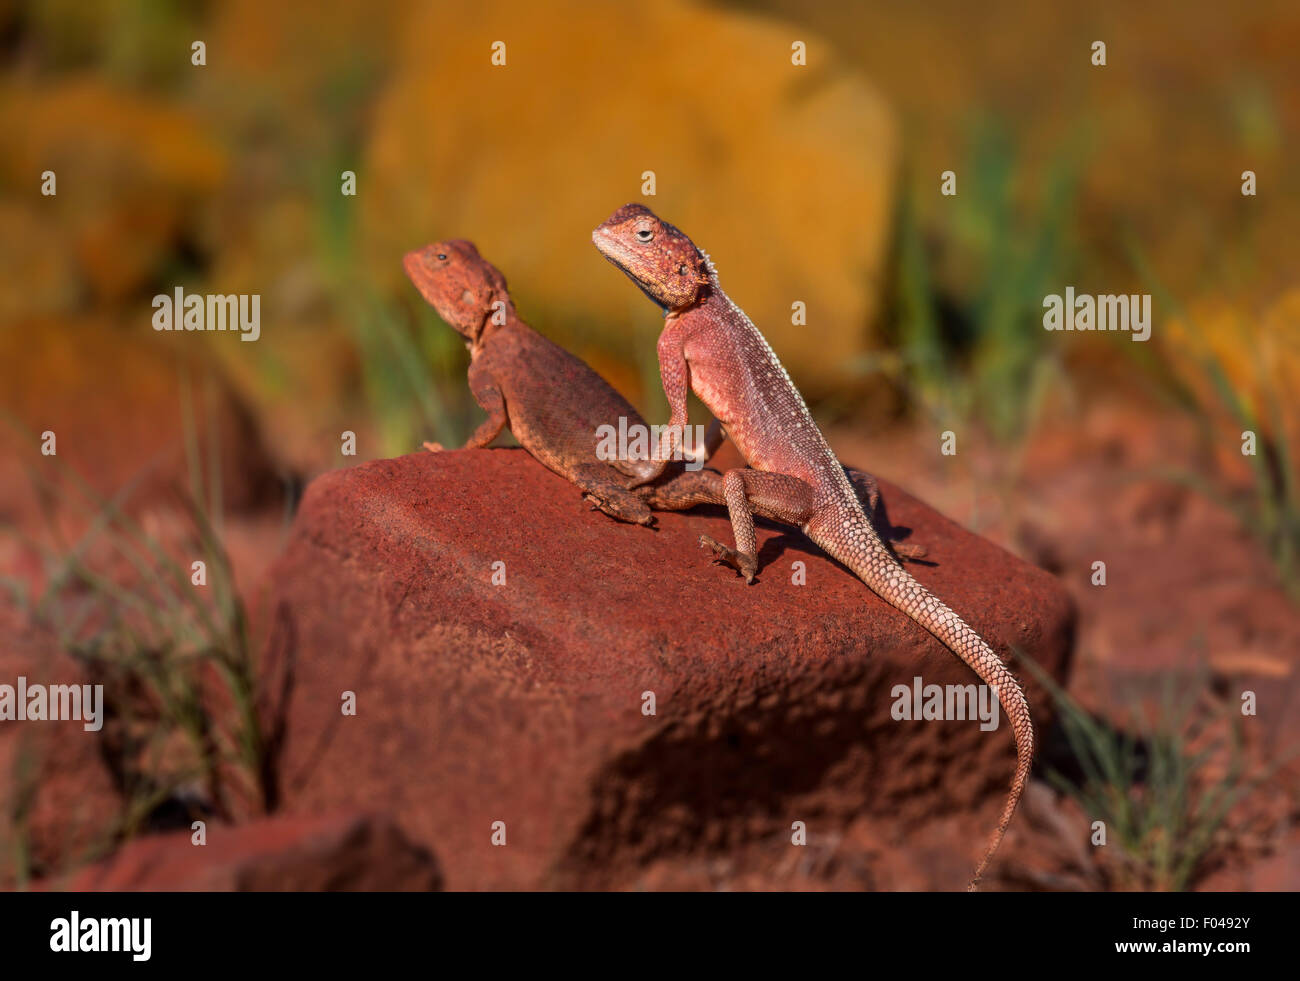 The common agama, red-headed rock agama, or rainbow agama, a species of lizard from the Agamidae family,  Namibia, Africa Stock Photo